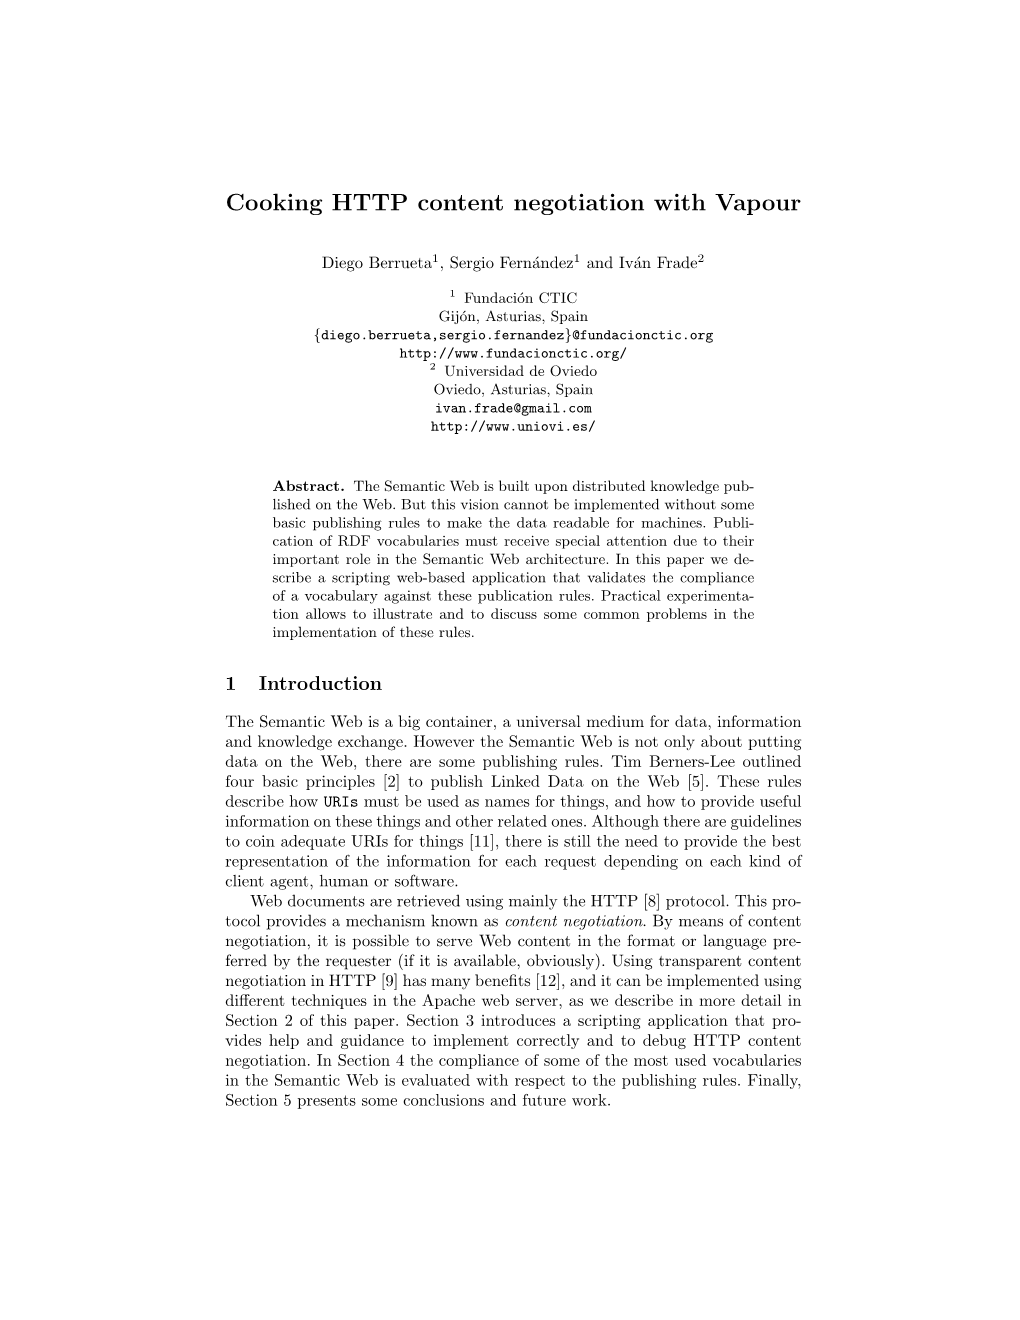 Cooking HTTP Content Negotiation with Vapour